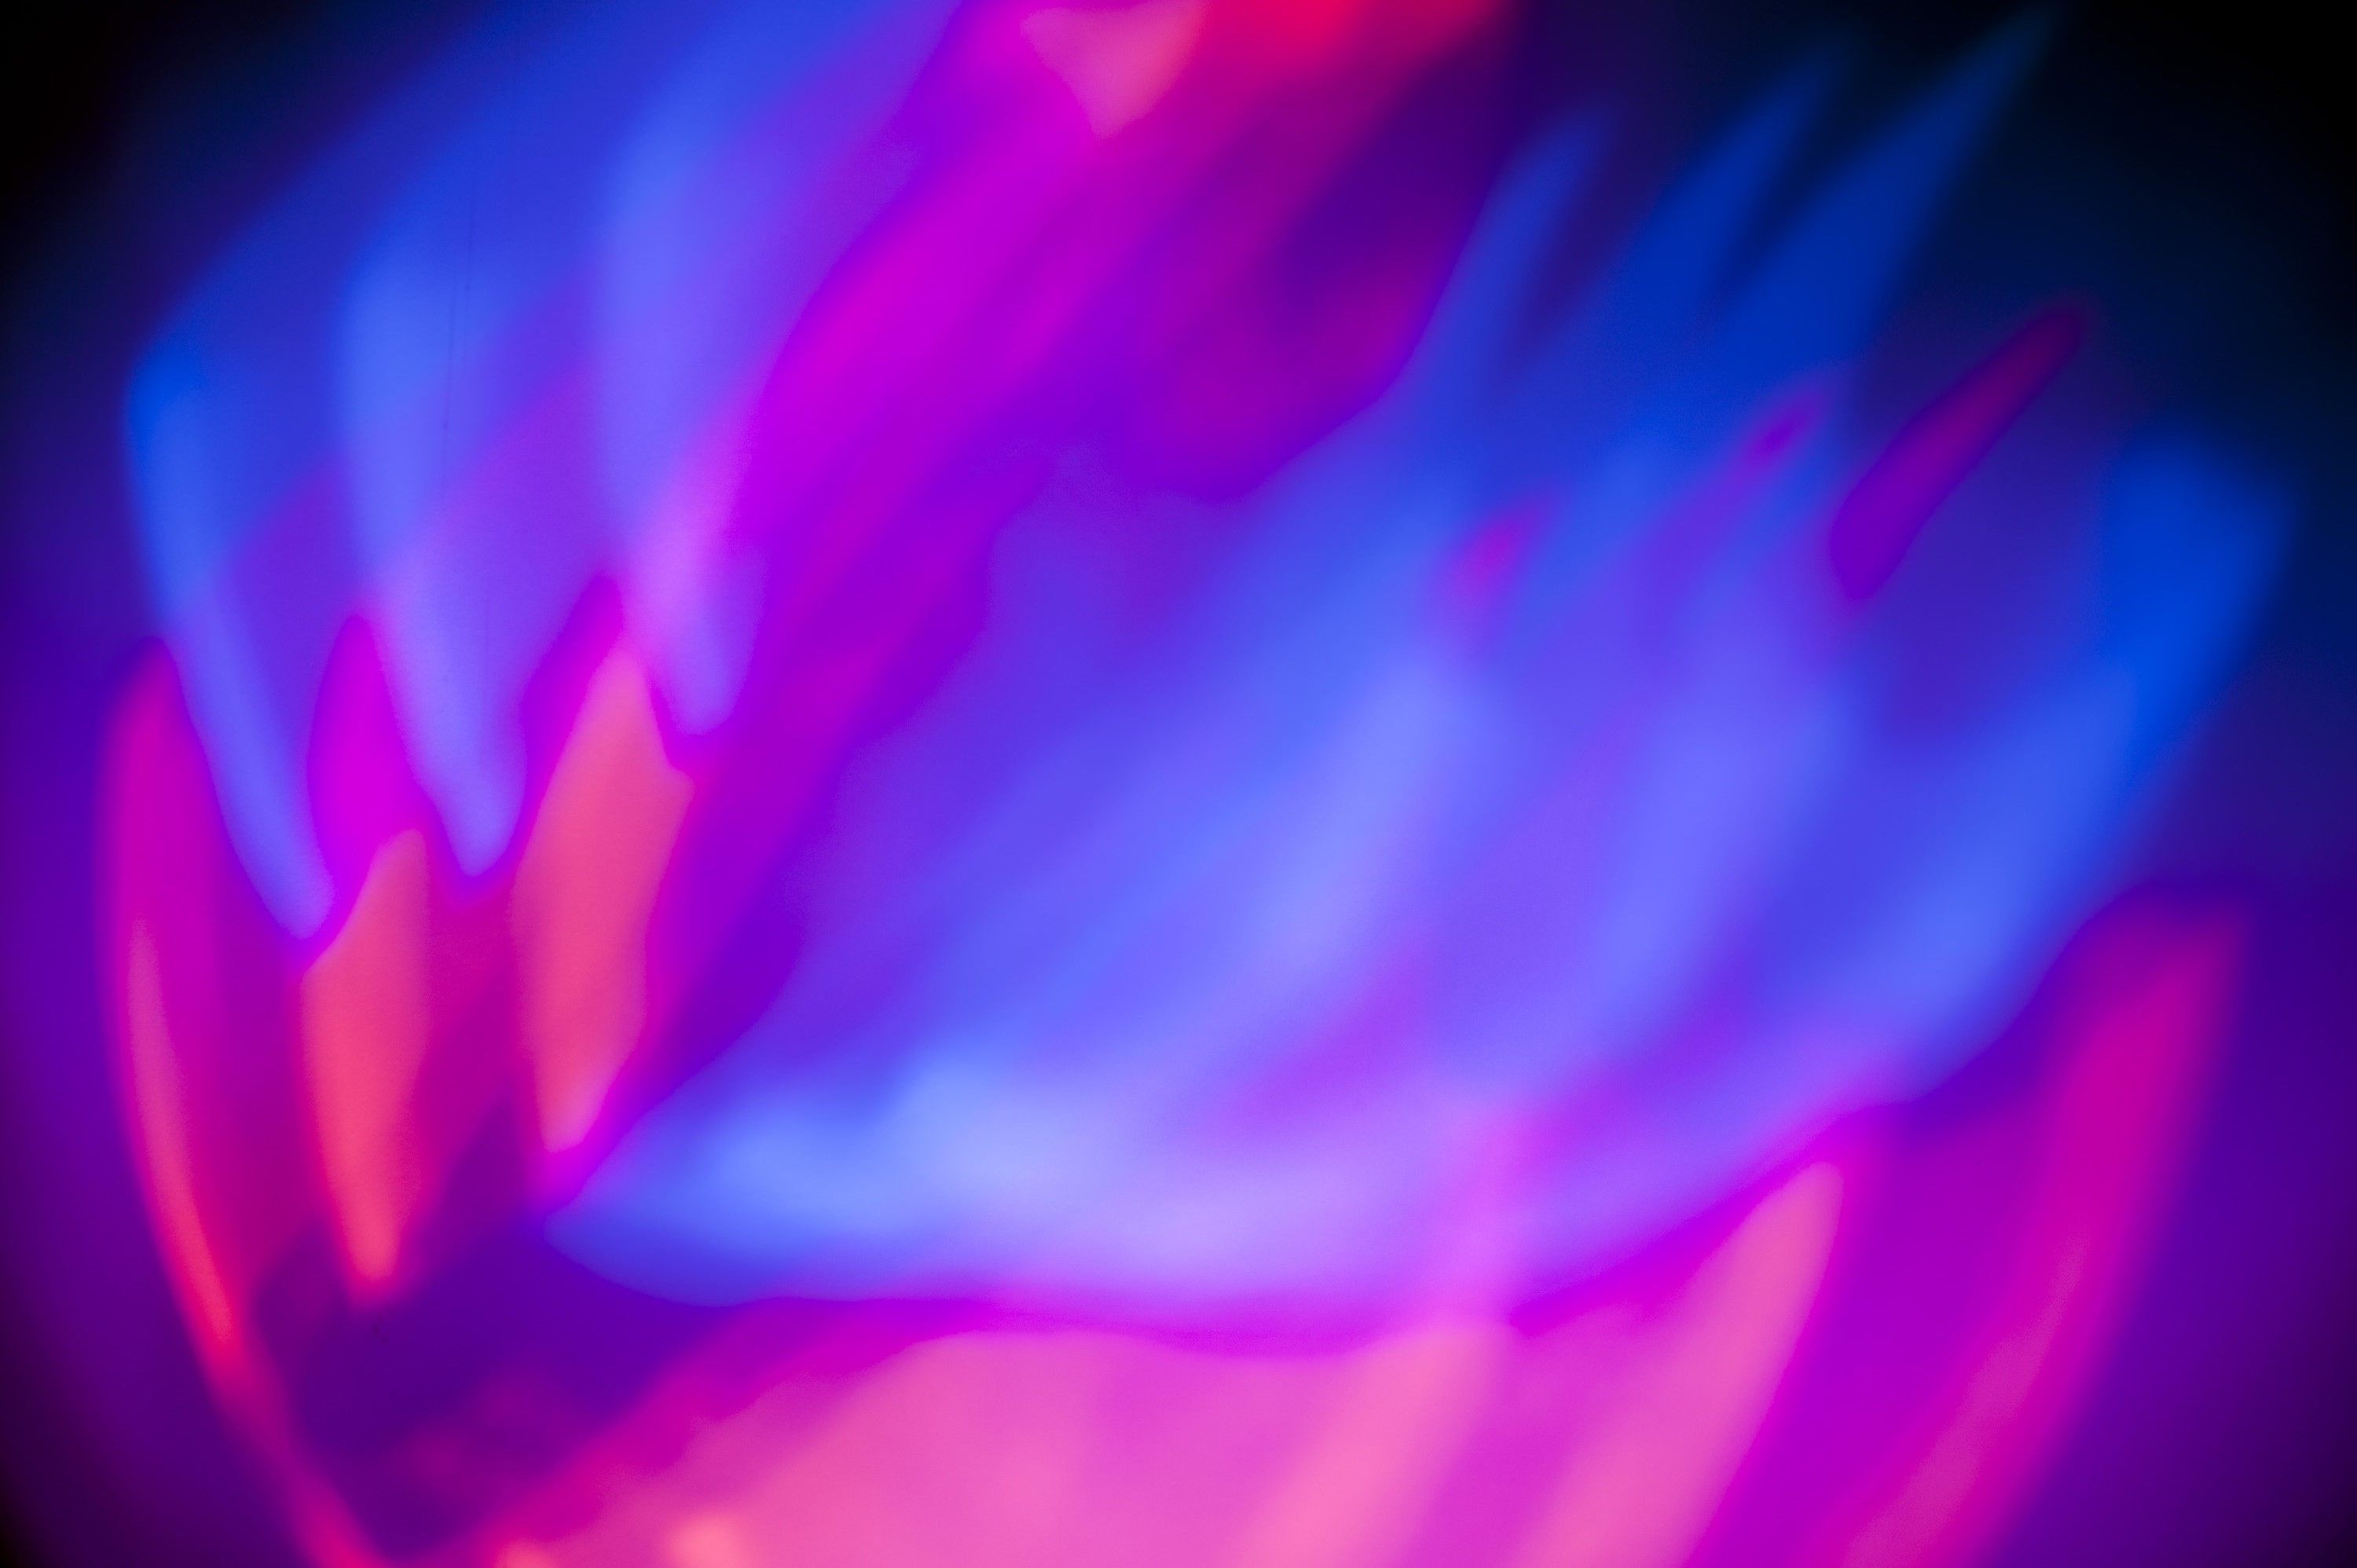 flaming blue red | Free backgrounds and textures | Cr103.com